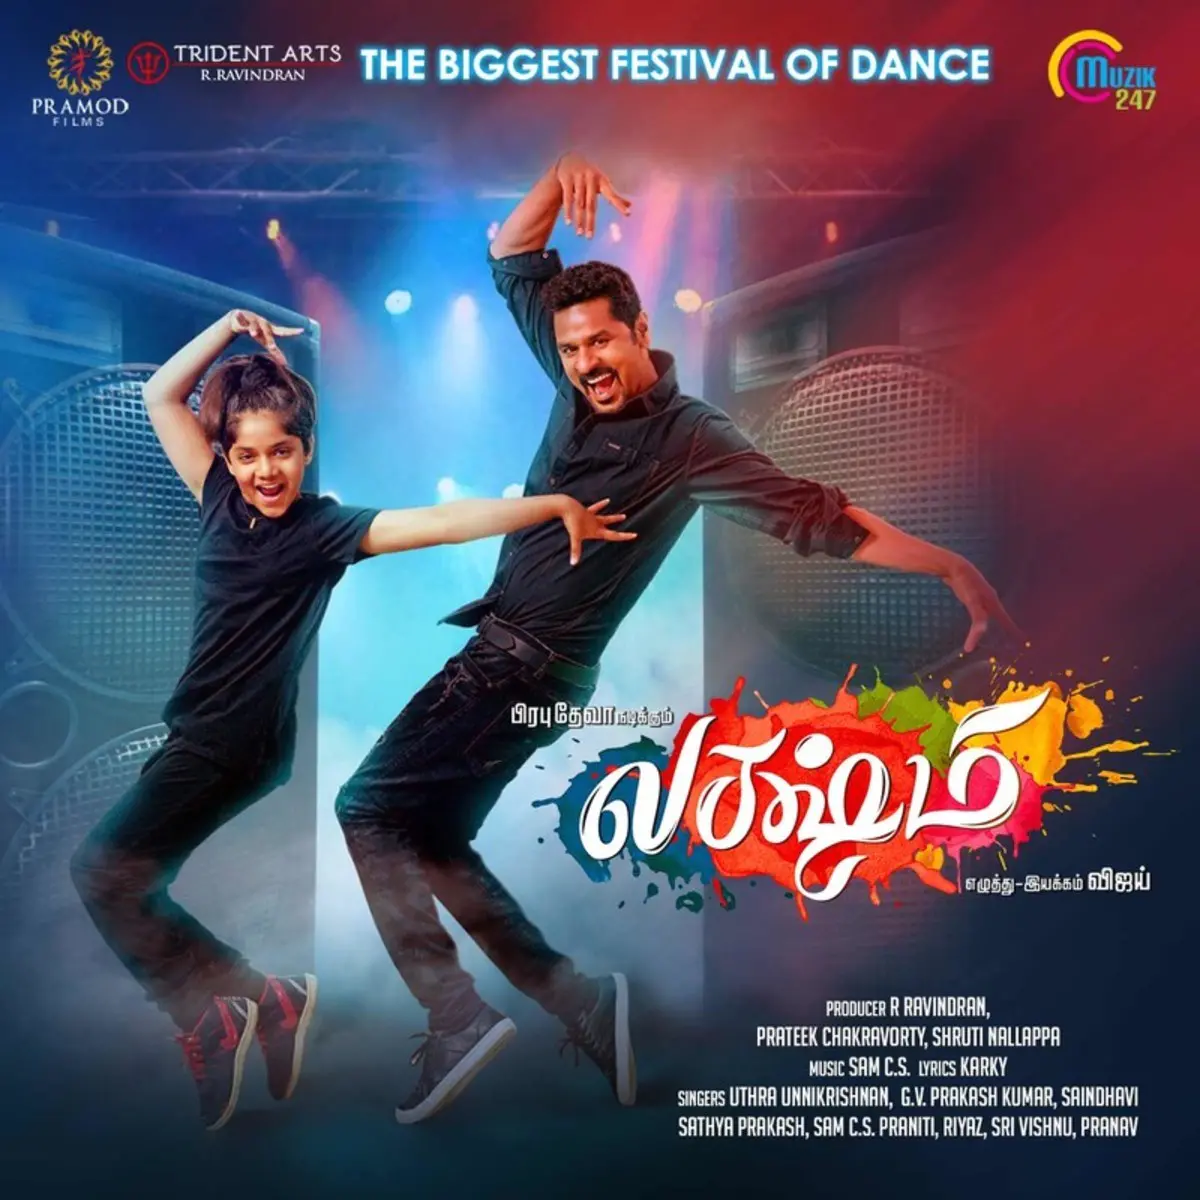 Dreamy Chellamma Lyrics In Tamil Lakshmi Dreamy Chellamma Song Lyrics In English Free Online On Gaana Com Sech & arcangel, both] if you go crazy for me (for me) and i go crazy for you (for you) (so, baby, leave the boyfriend you have tell him you don't want him) you drank first, then you called and in the middle of hints you. lakshmi dreamy chellamma song lyrics